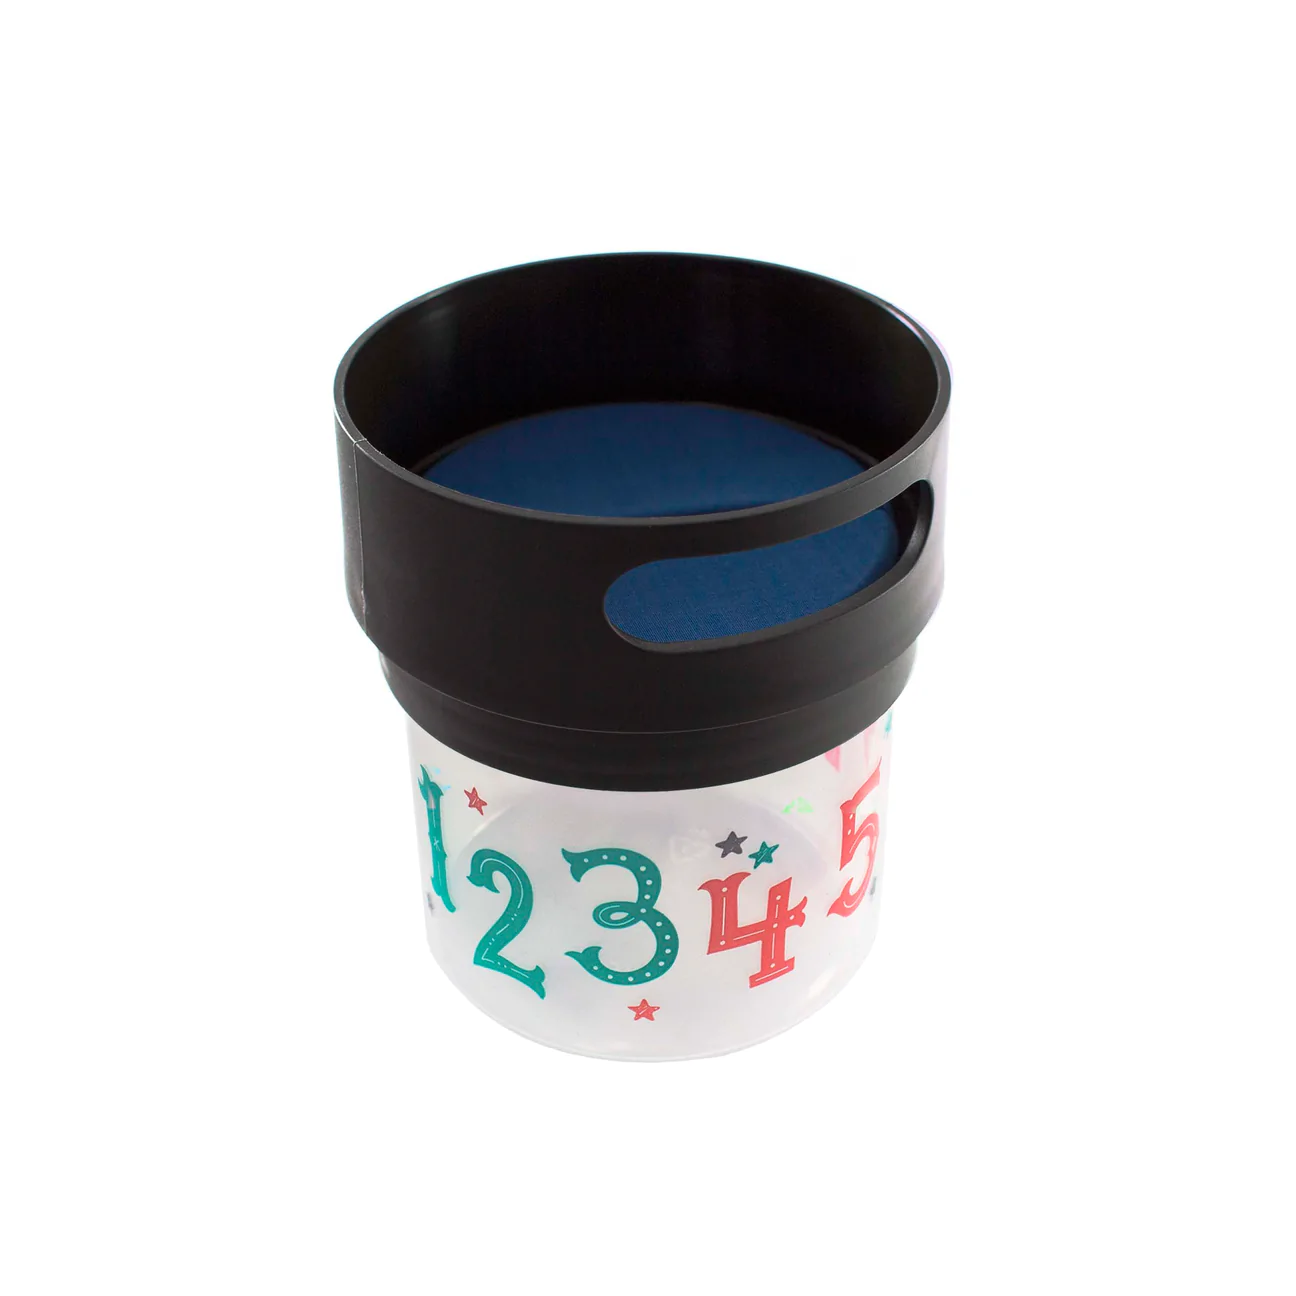 Spill-proof kid's snack cup made in USA - Black Munchie Mug